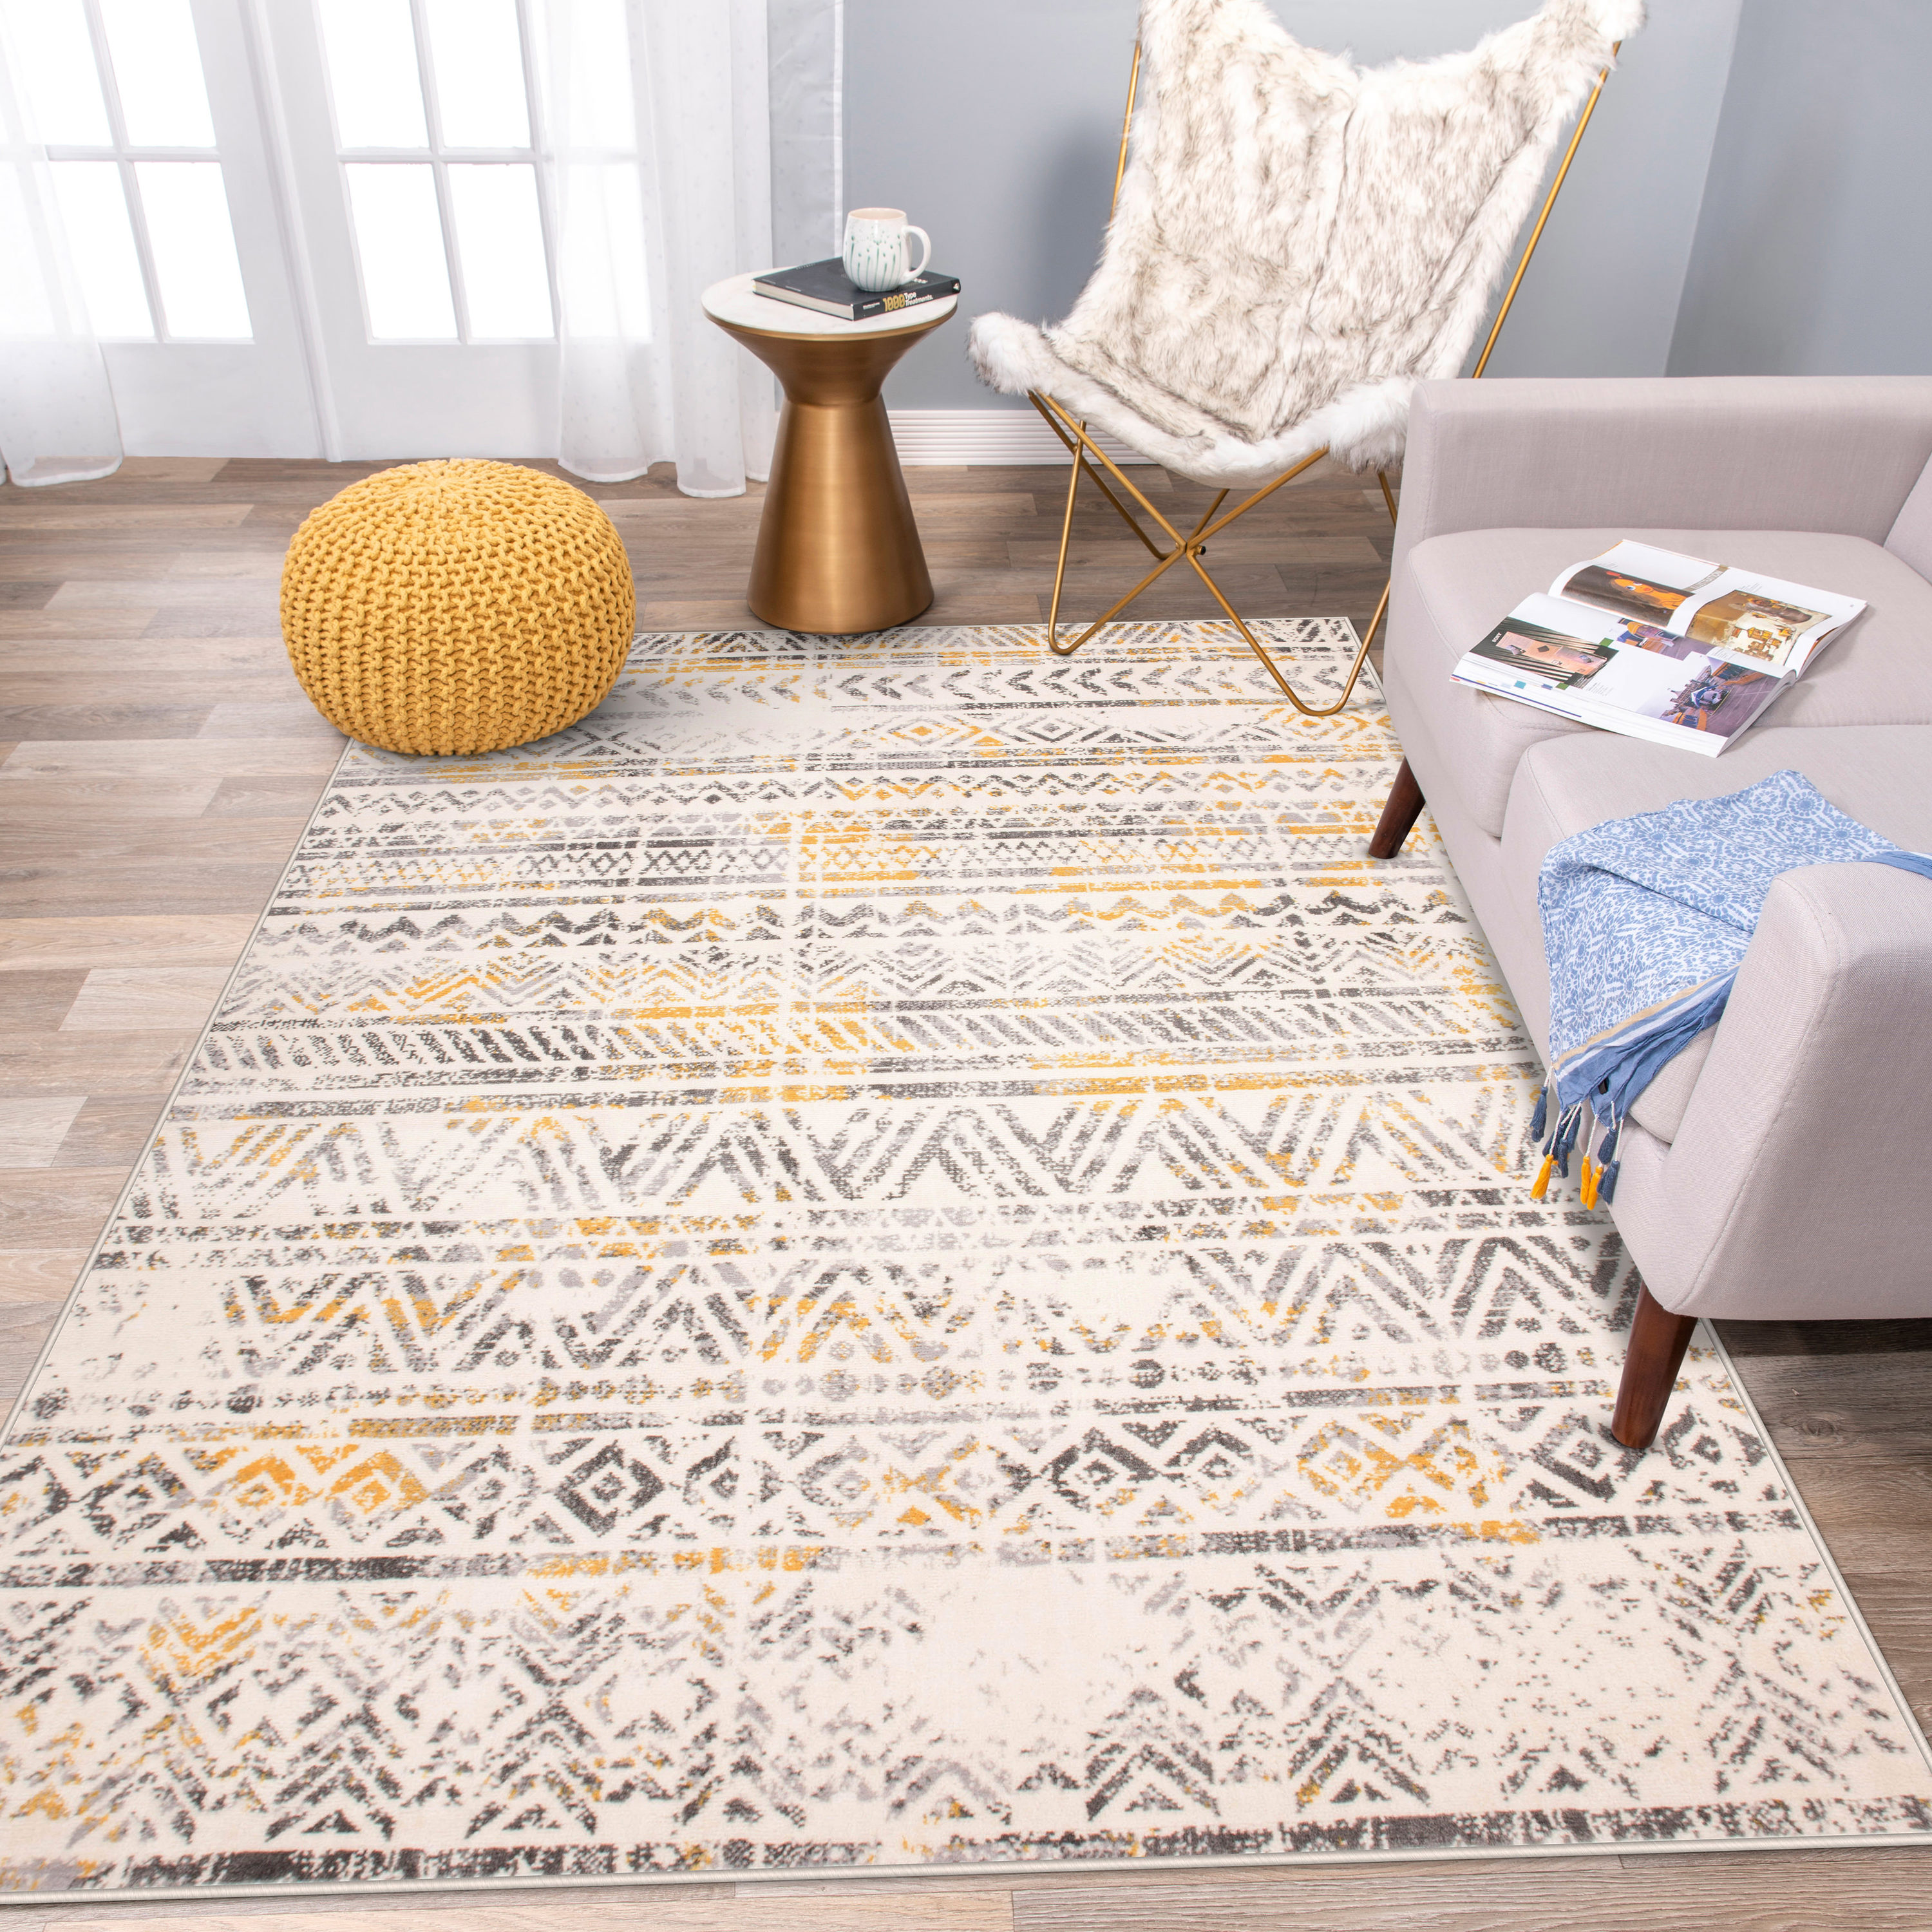 Ladole Rugs Abstract Pattern Home Decor Indoor Area Rug - Amazing Premium  Carpet for Living Room, Bedroom, Dining Room, Kitchen, and Office - Cream